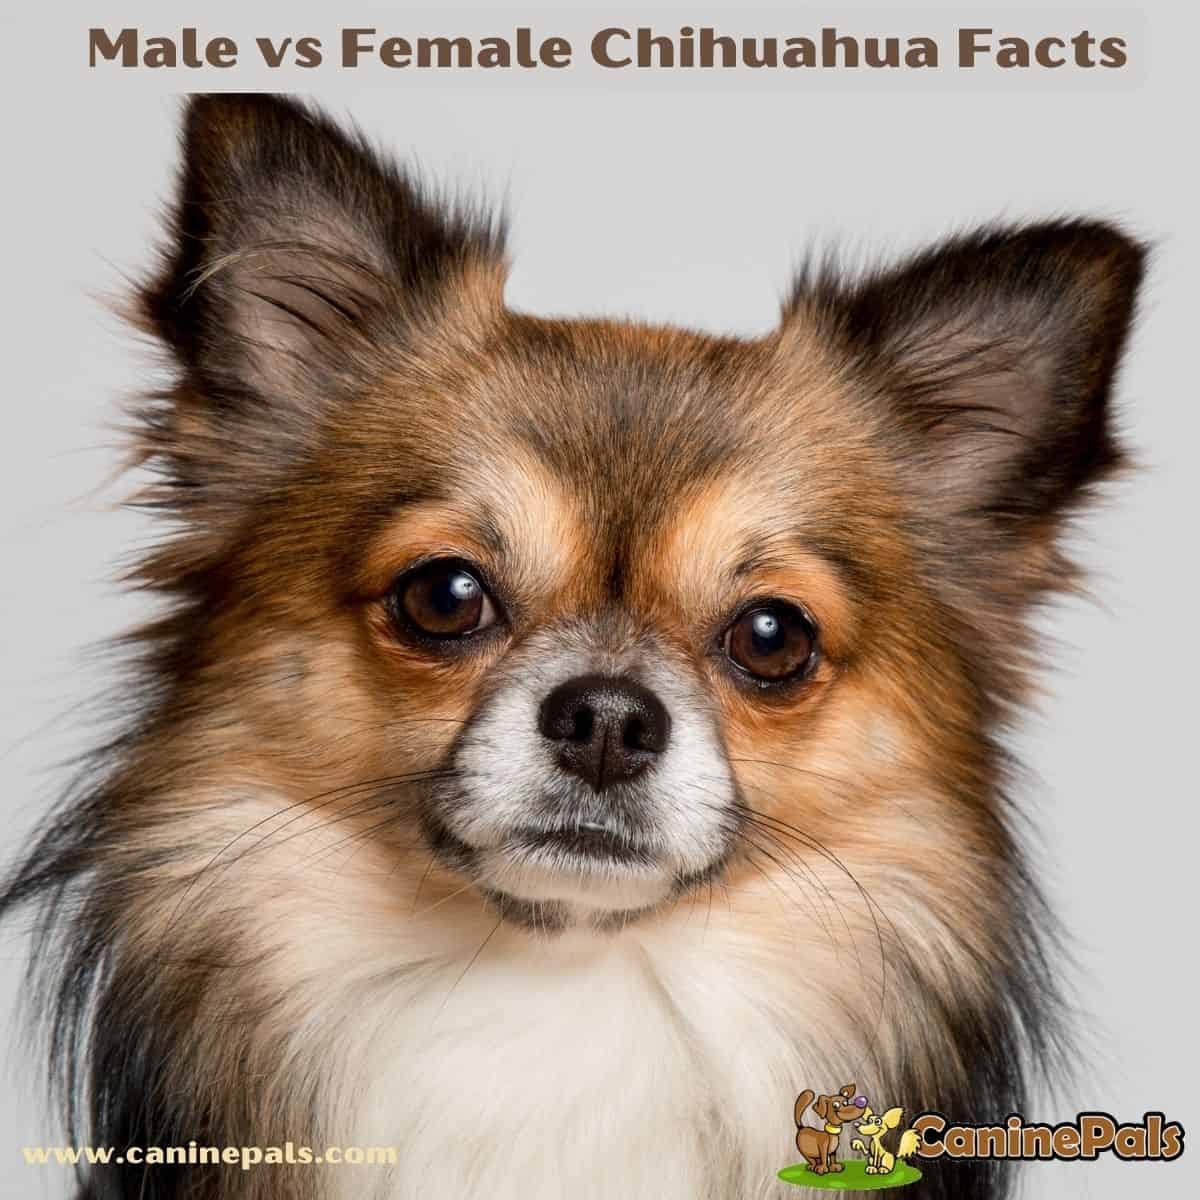 Male vs Female Chihuahua Facts Explained in Detail - Canine Pals